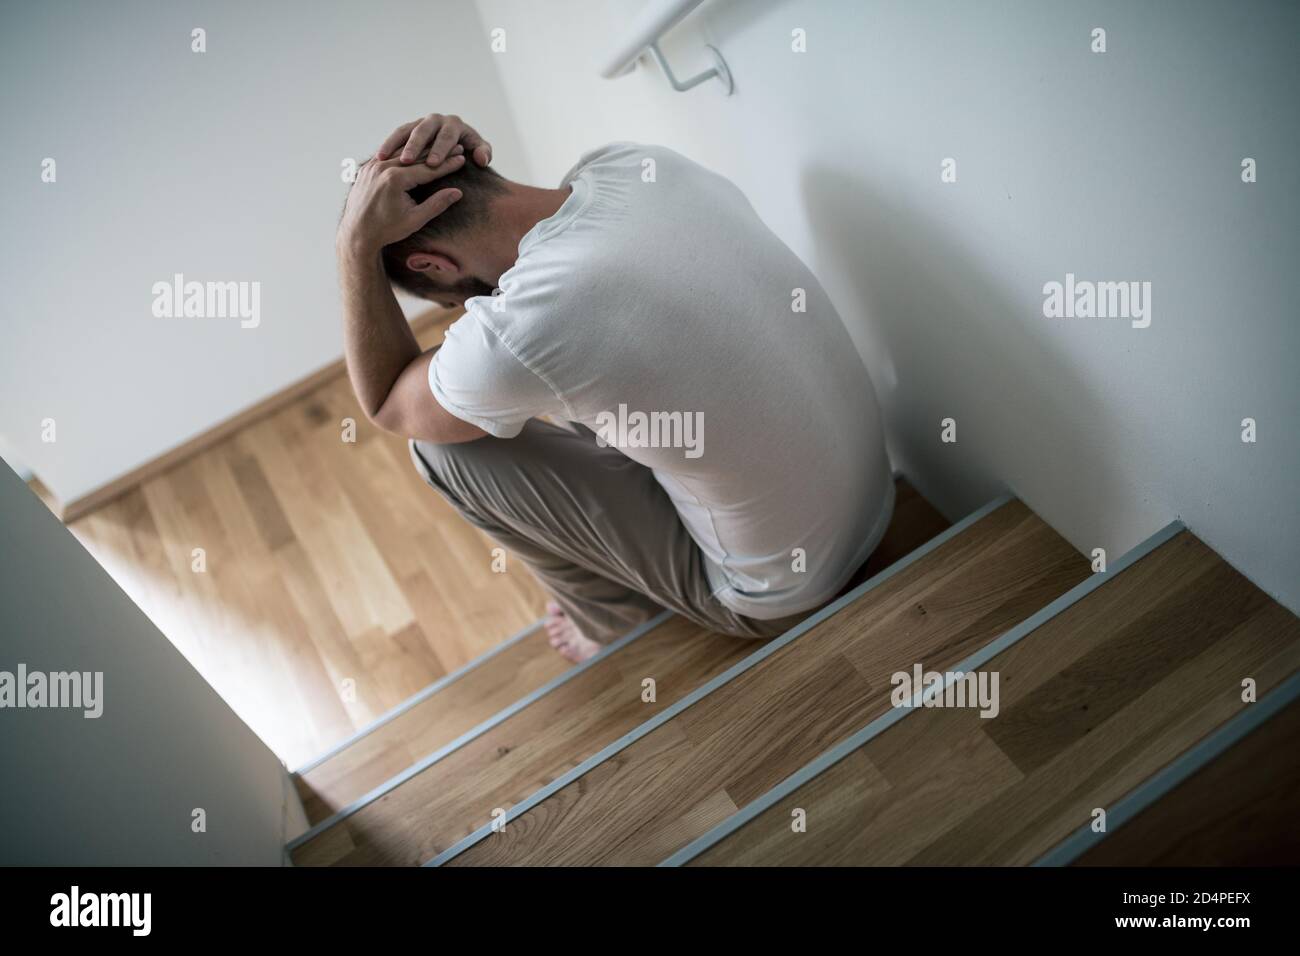 Depressed young man at home worried about finances Stock Photo